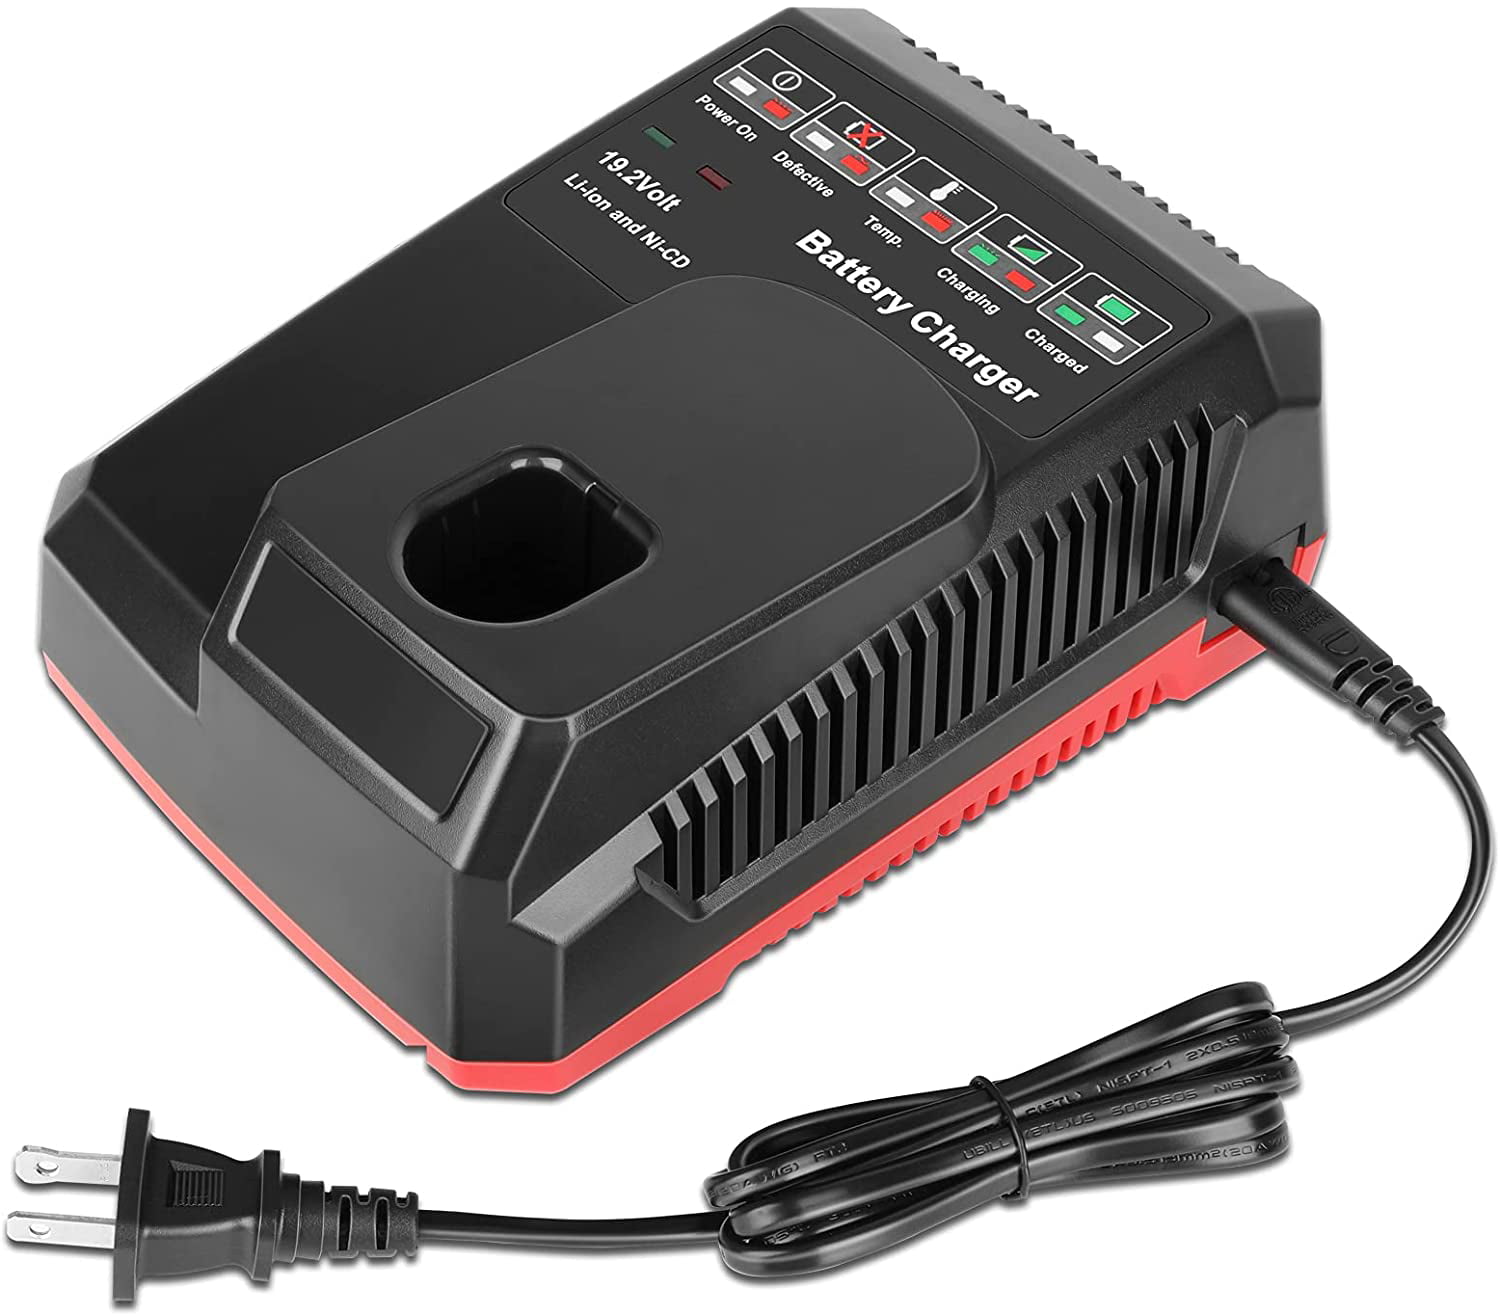 19.2 Volt XCP Lithium Battery Charger For Craftsman C3 PP2011 11375 130279005 